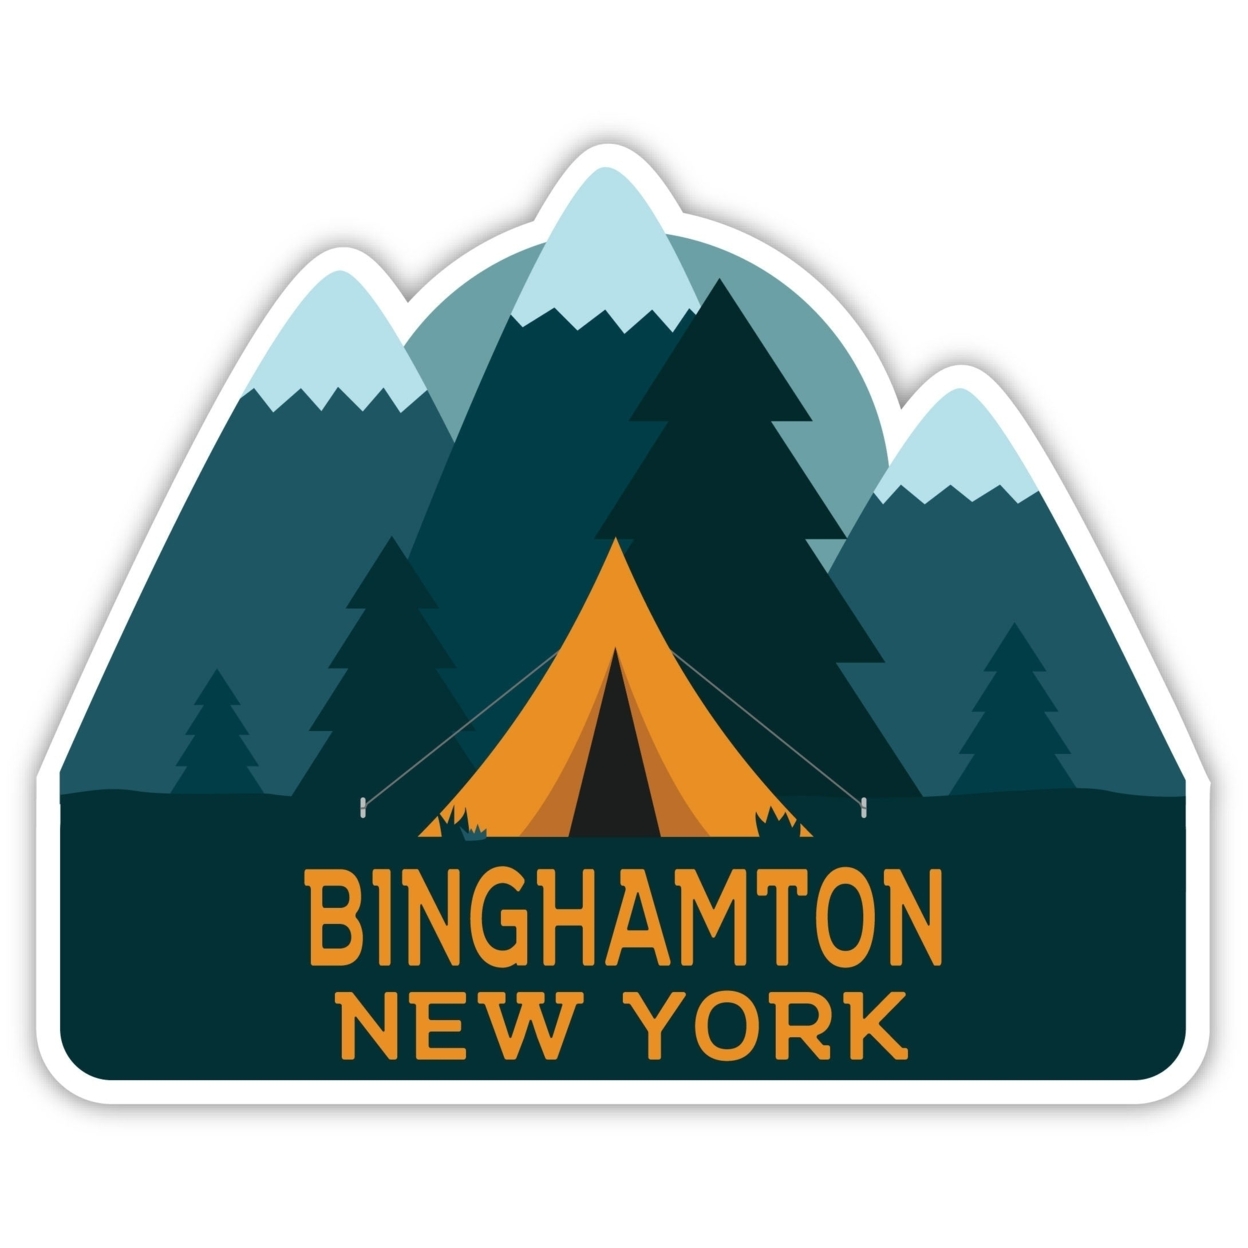 Binghamton New York Souvenir Decorative Stickers (Choose Theme And Size) - 4-Pack, 8-Inch, Tent